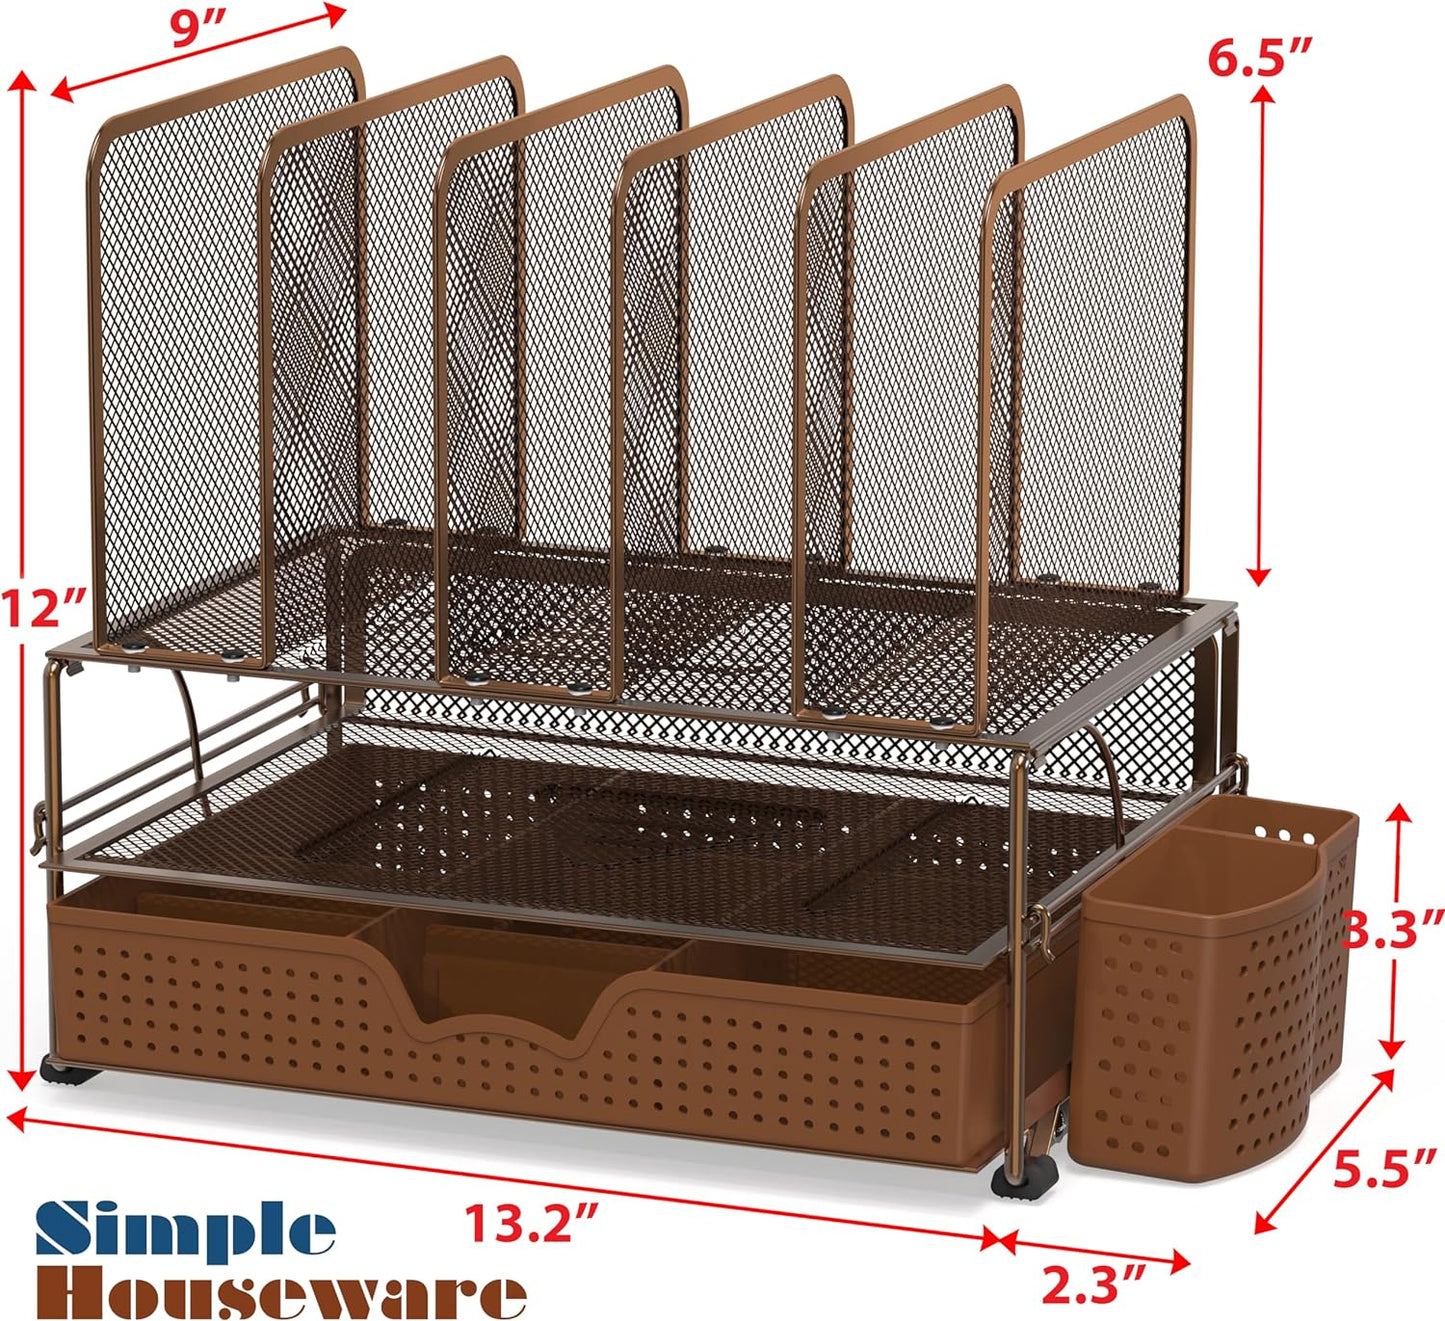 Mesh Desk Organizer with Sliding Drawer, Double Tray and 5 Upright Sections, Brown